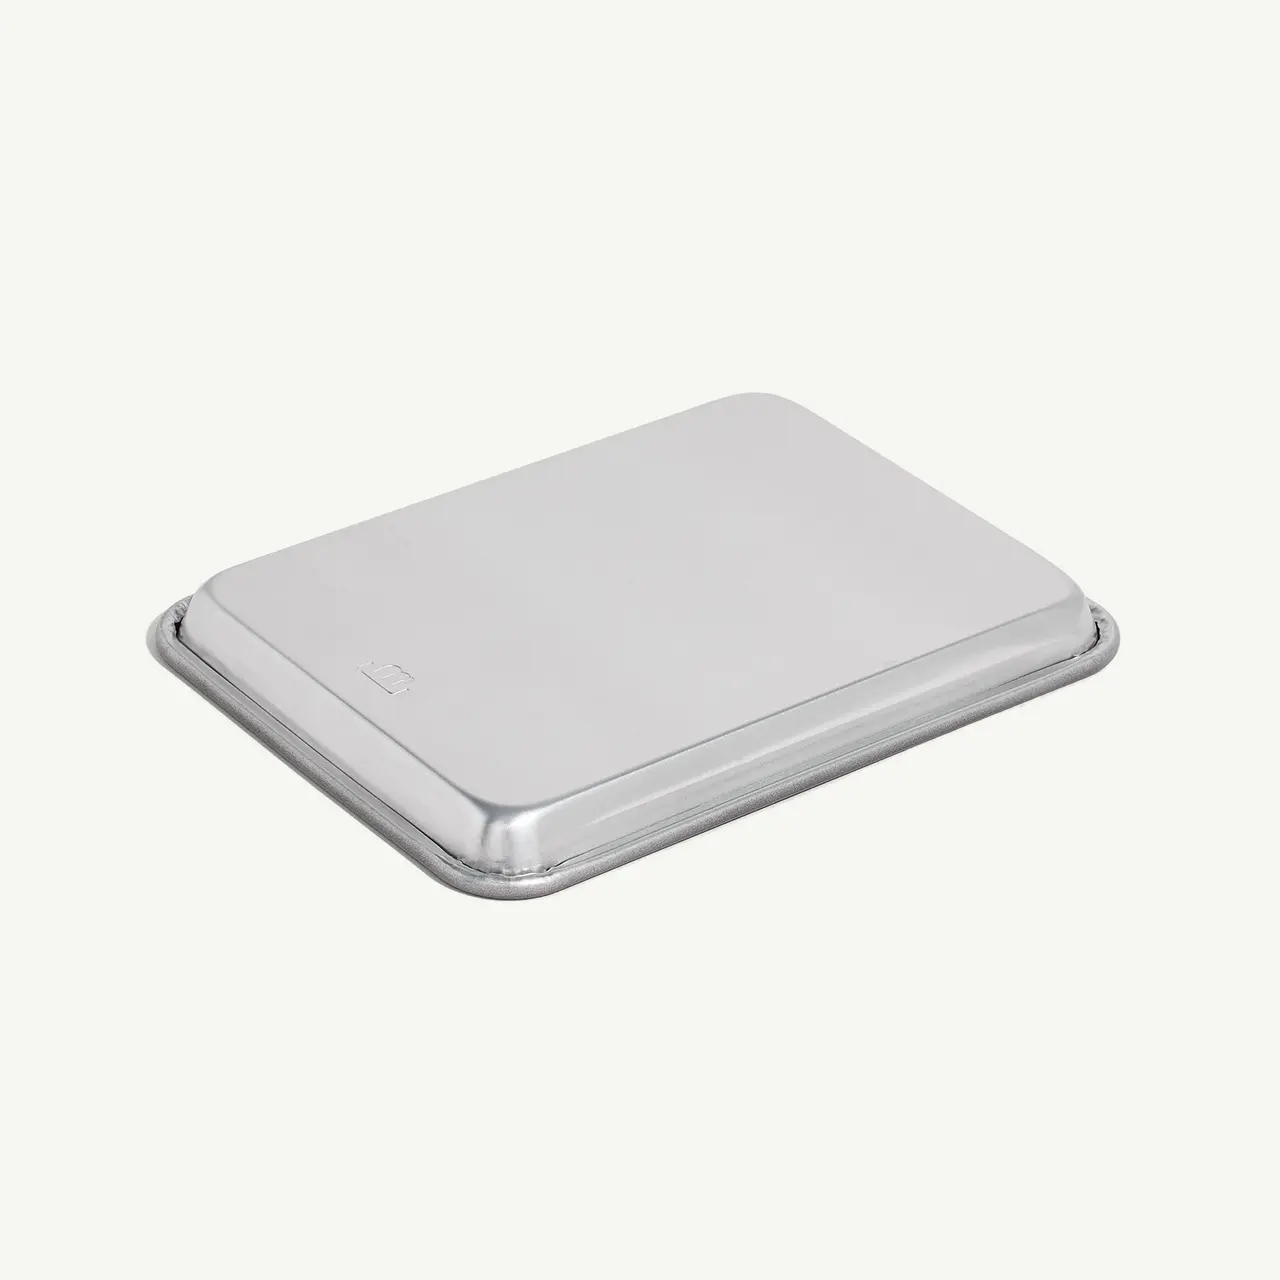 A silver external hard drive is shown against a white background.